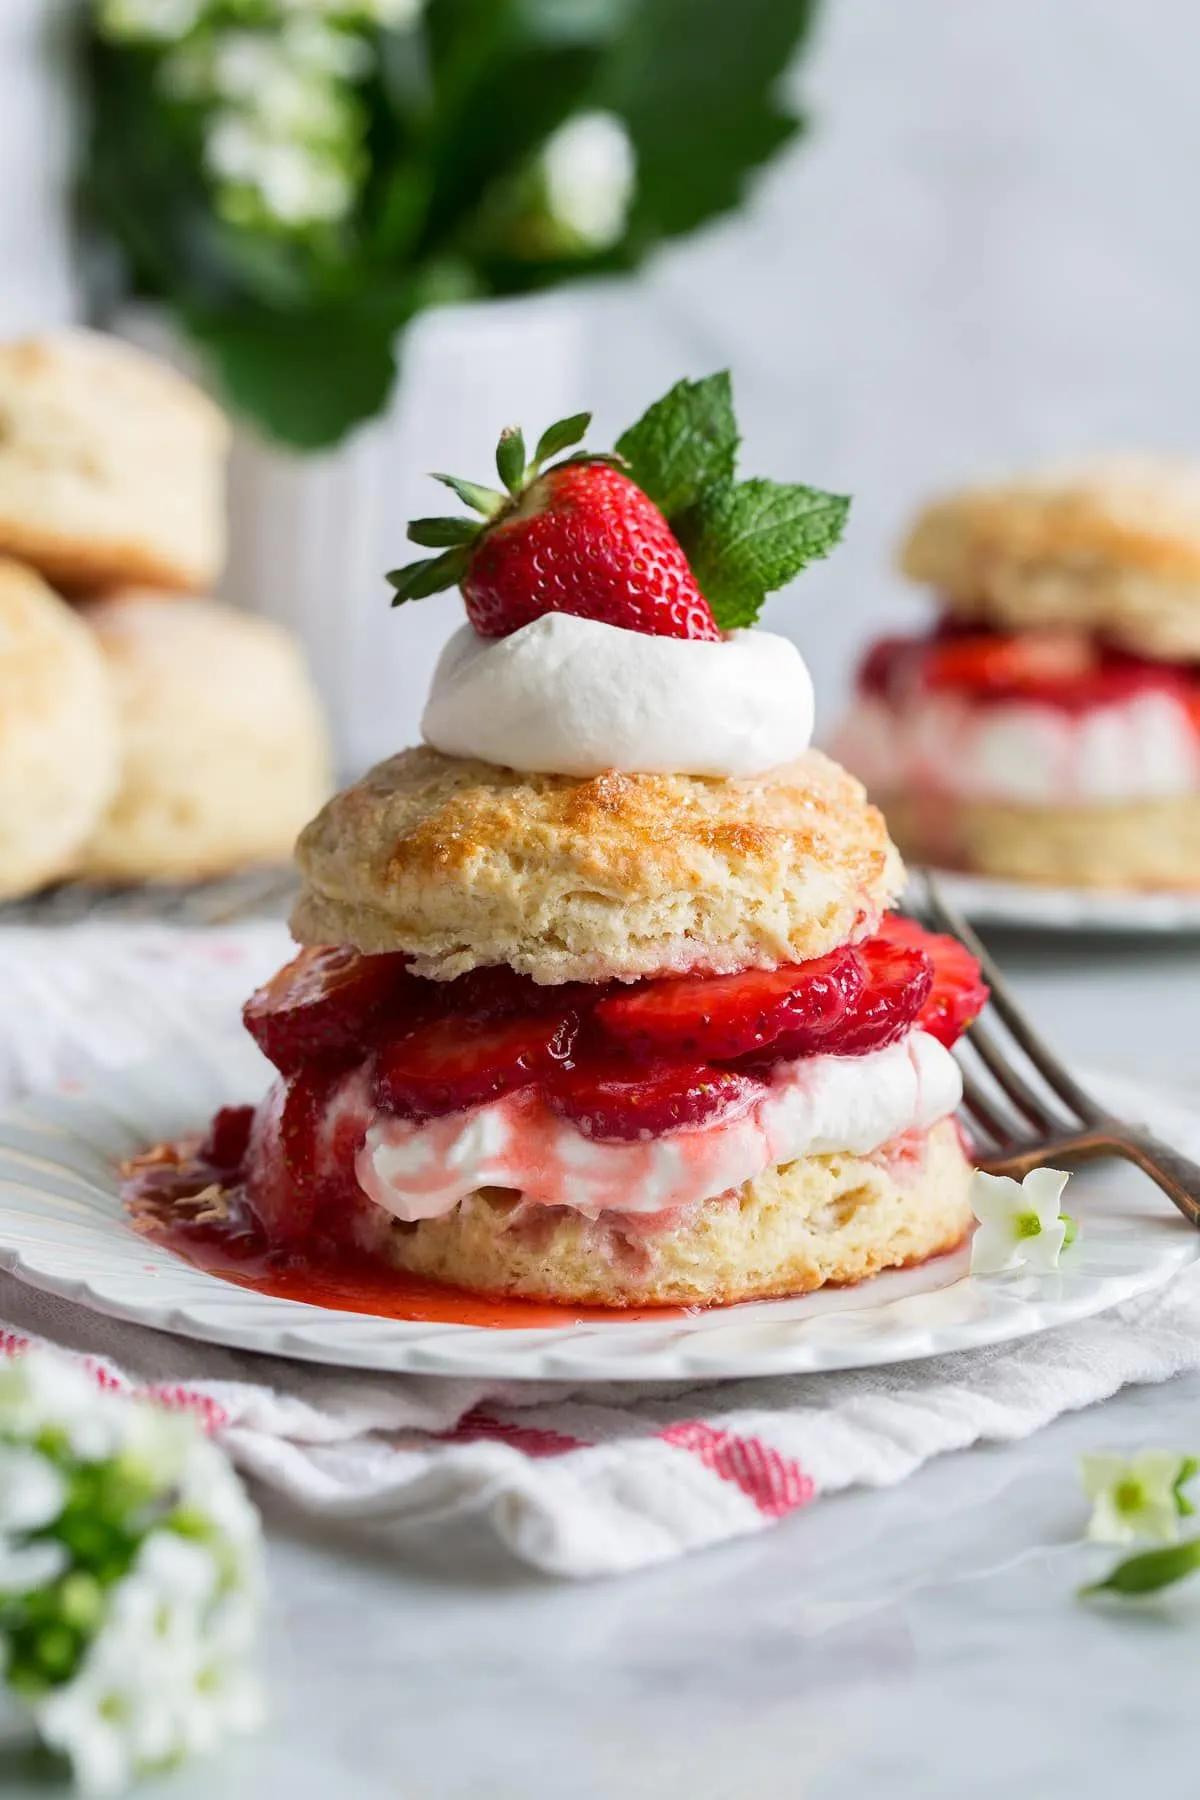 Strawberry Shortcake Strawberry Shortcake - made with perfectly fluffy ...